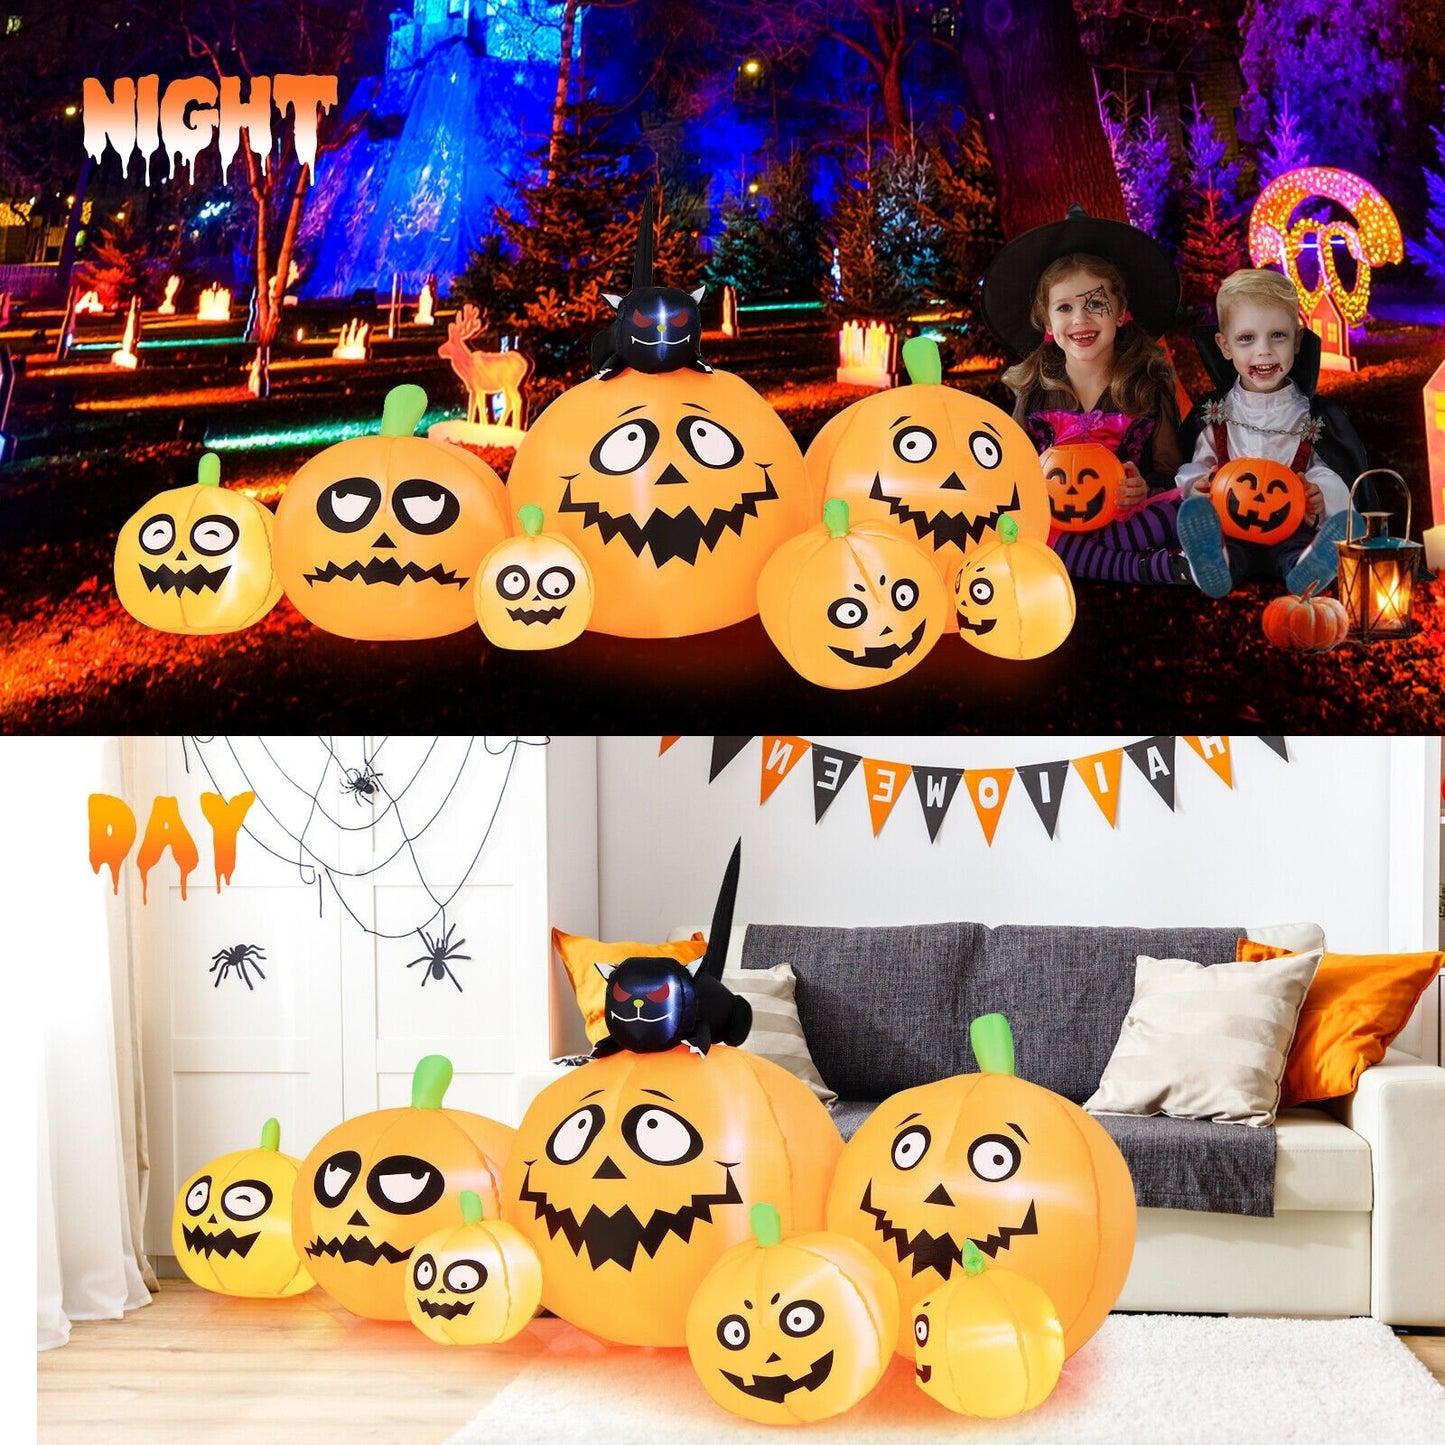 8 Feet Long Halloween Inflatable Pumpkins with Witch's Cat, Orange